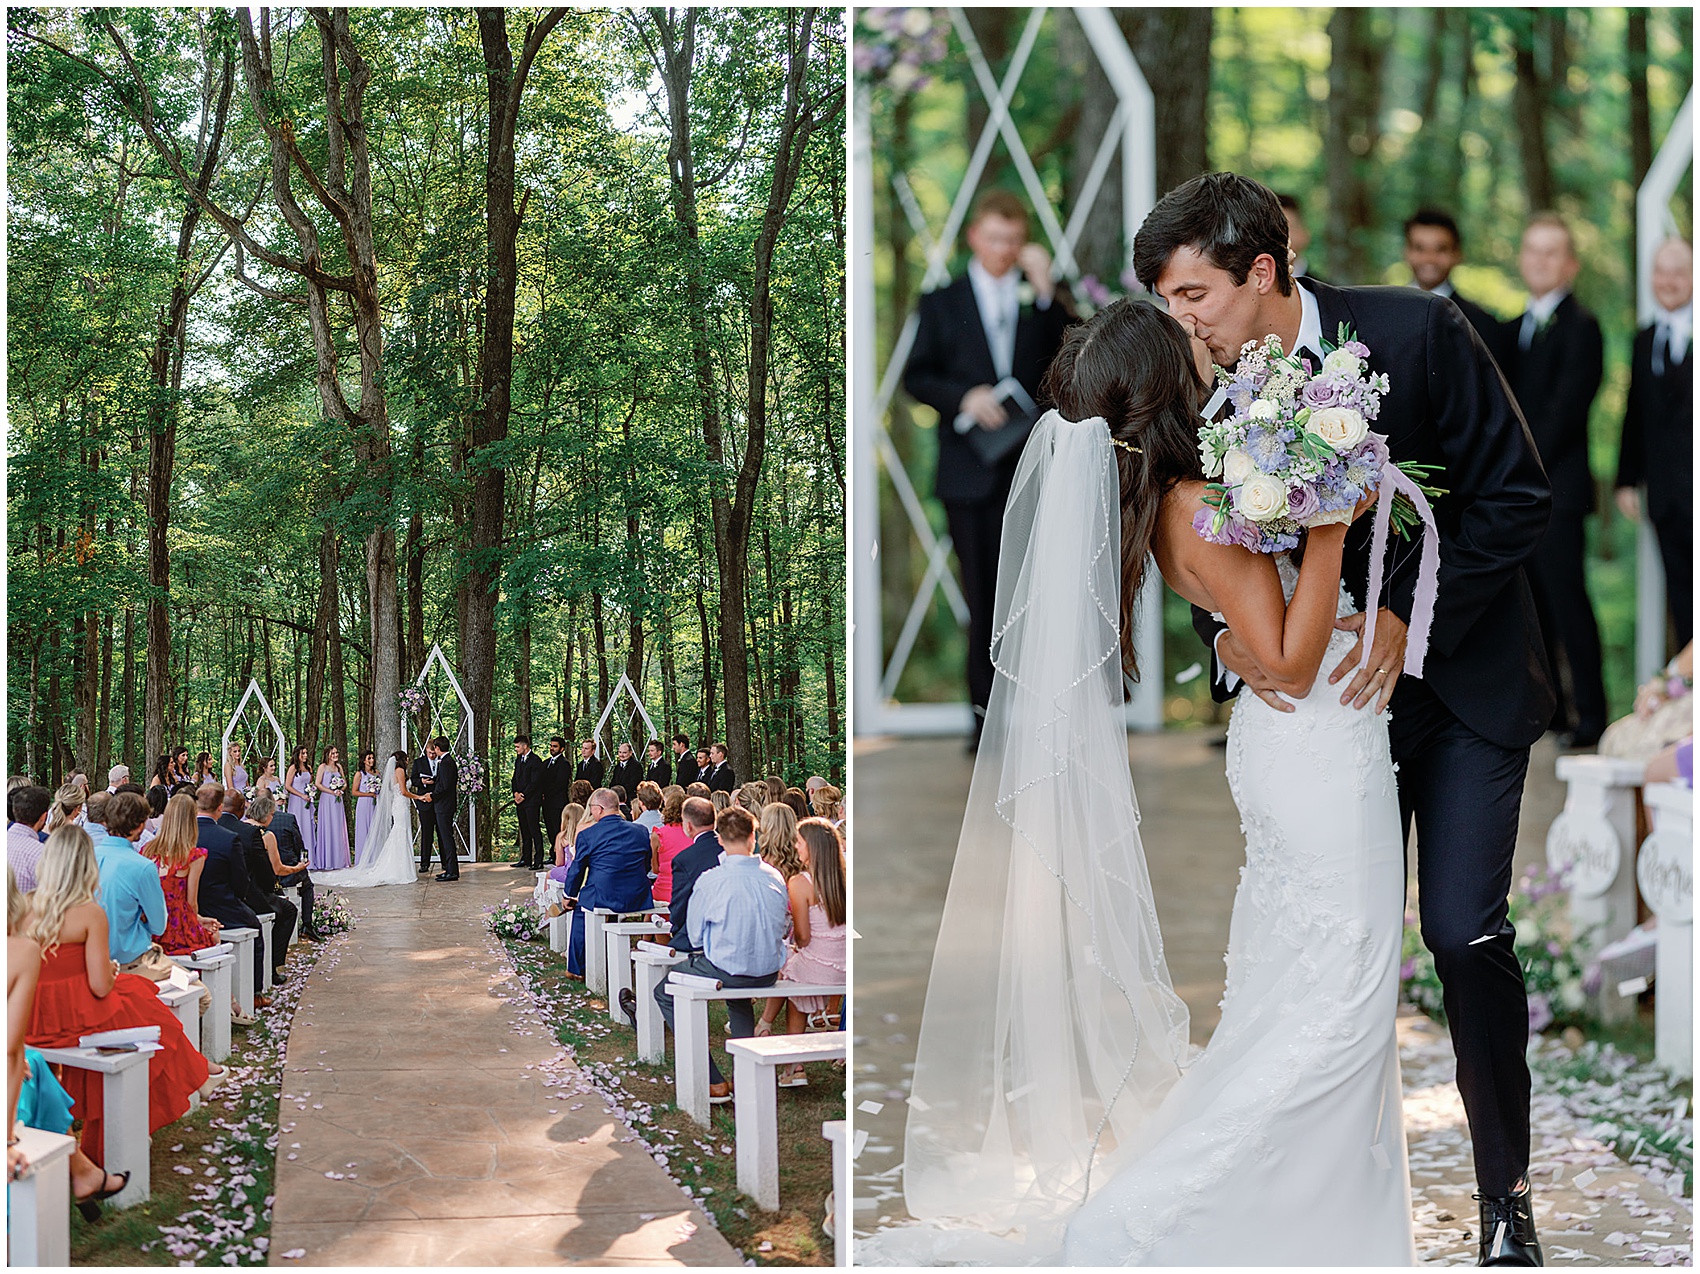 Newlyweds kiss in the aisle at the end of their wedding reception in a forest